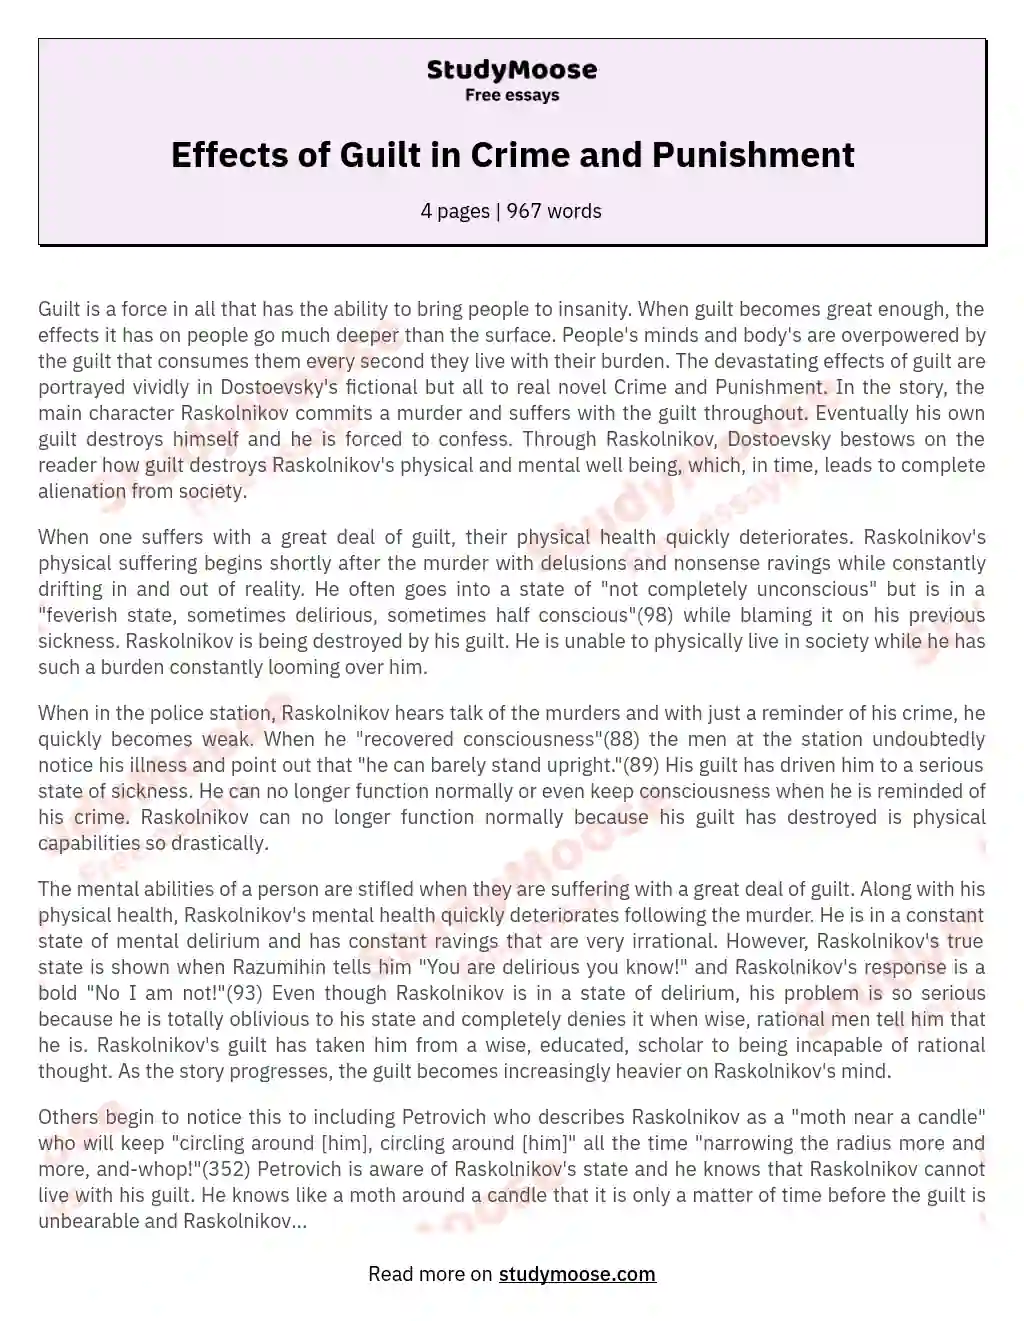 Effects of Guilt in Crime and Punishment essay